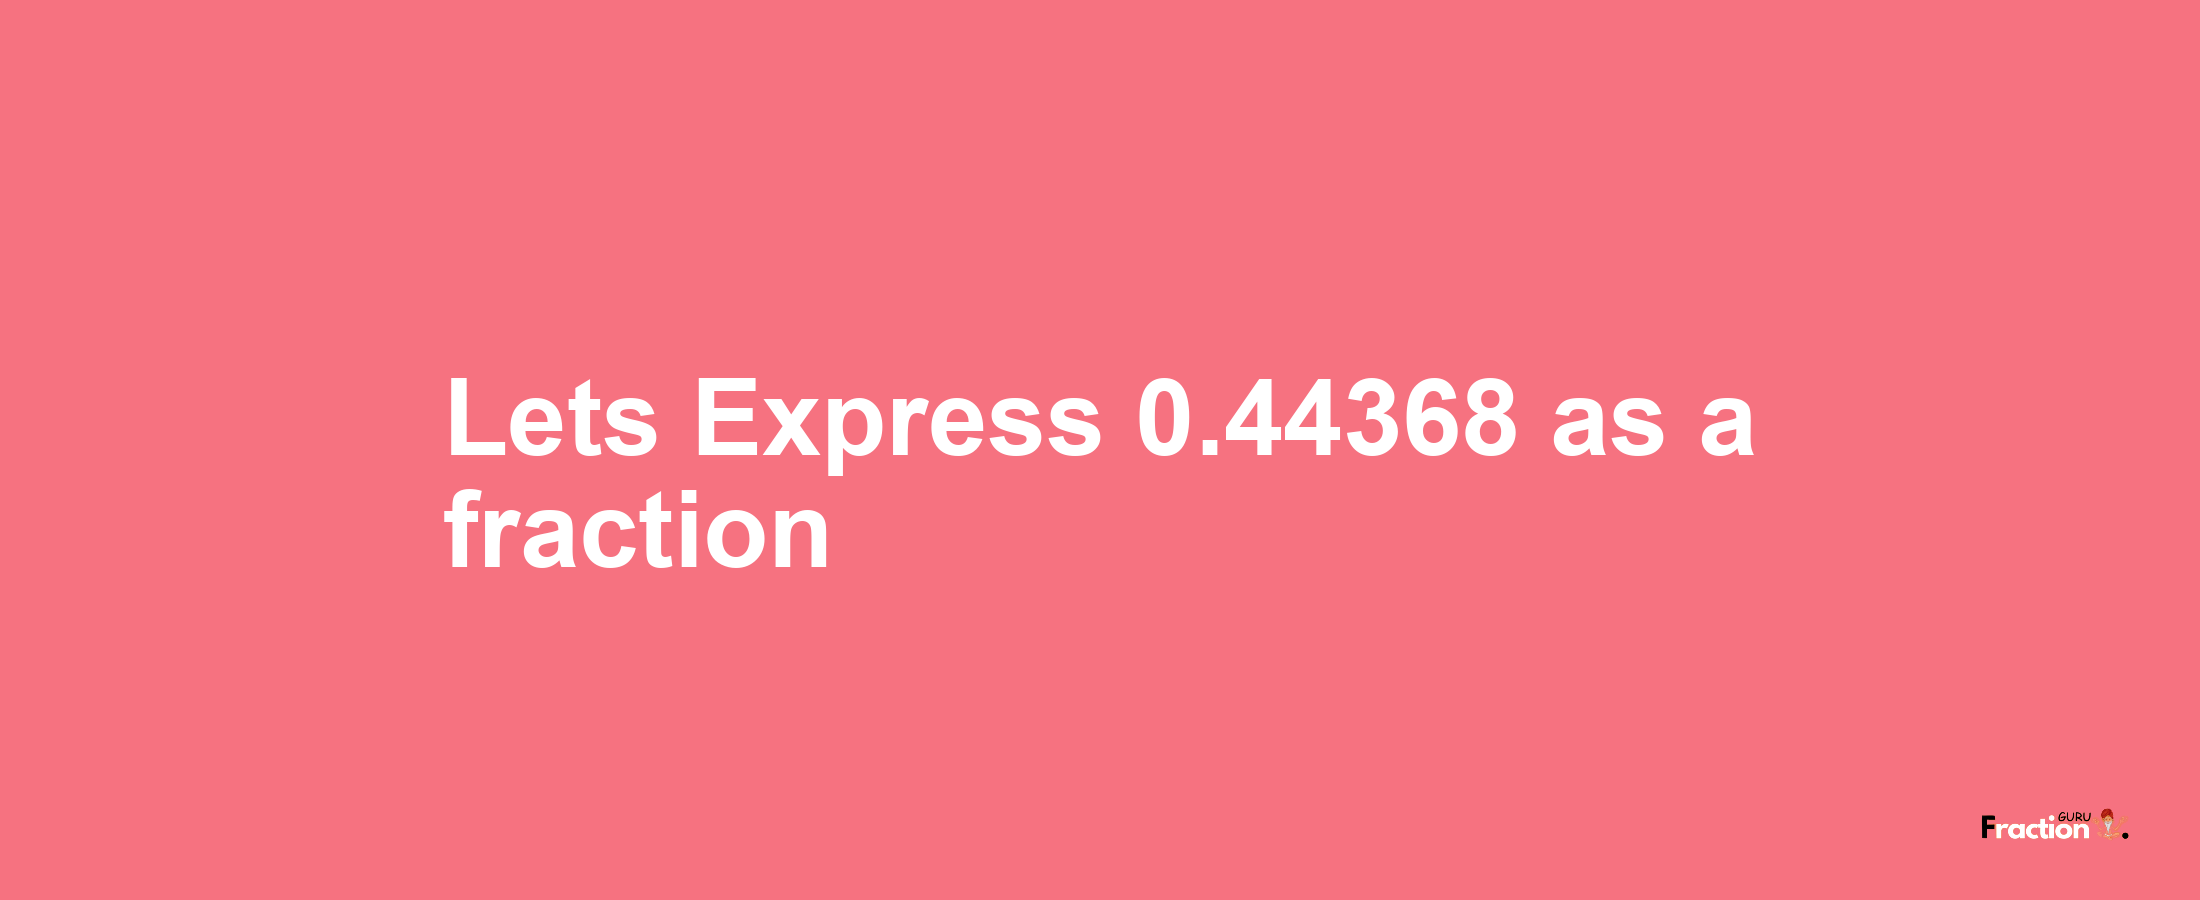 Lets Express 0.44368 as afraction